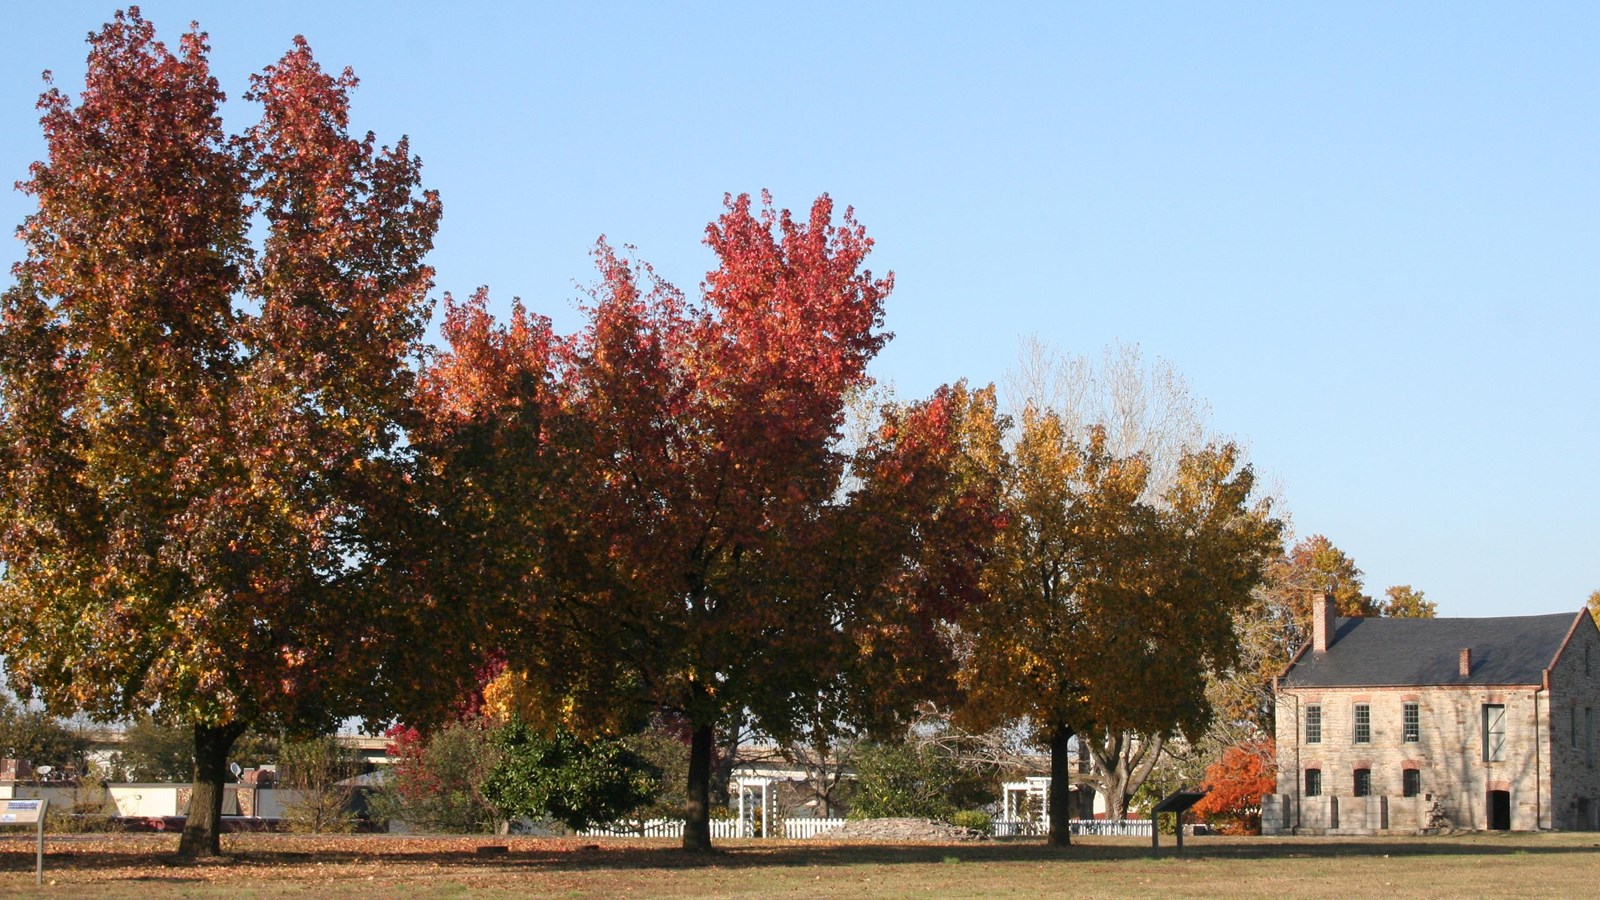 Three trees with red, orange, and green leaves in a row. Tan stone commissary in the distance.